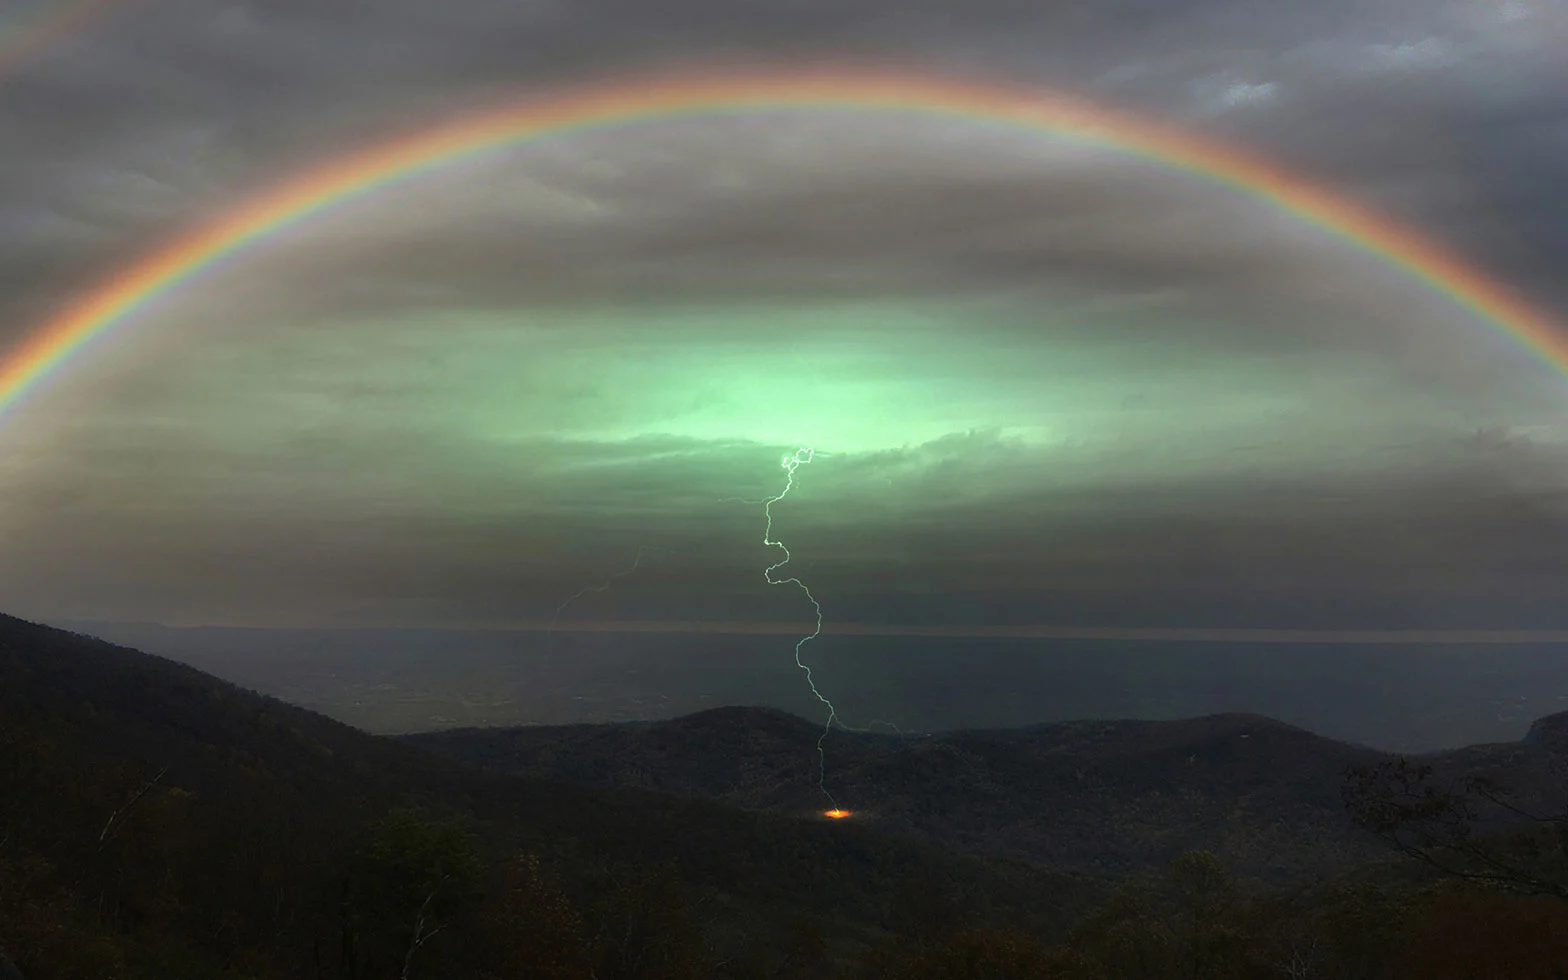 An overcast landscape photograph of a double rainbow over a lush mountainscape. At the center of the image is a single lightning bolt making contact with the earth. 